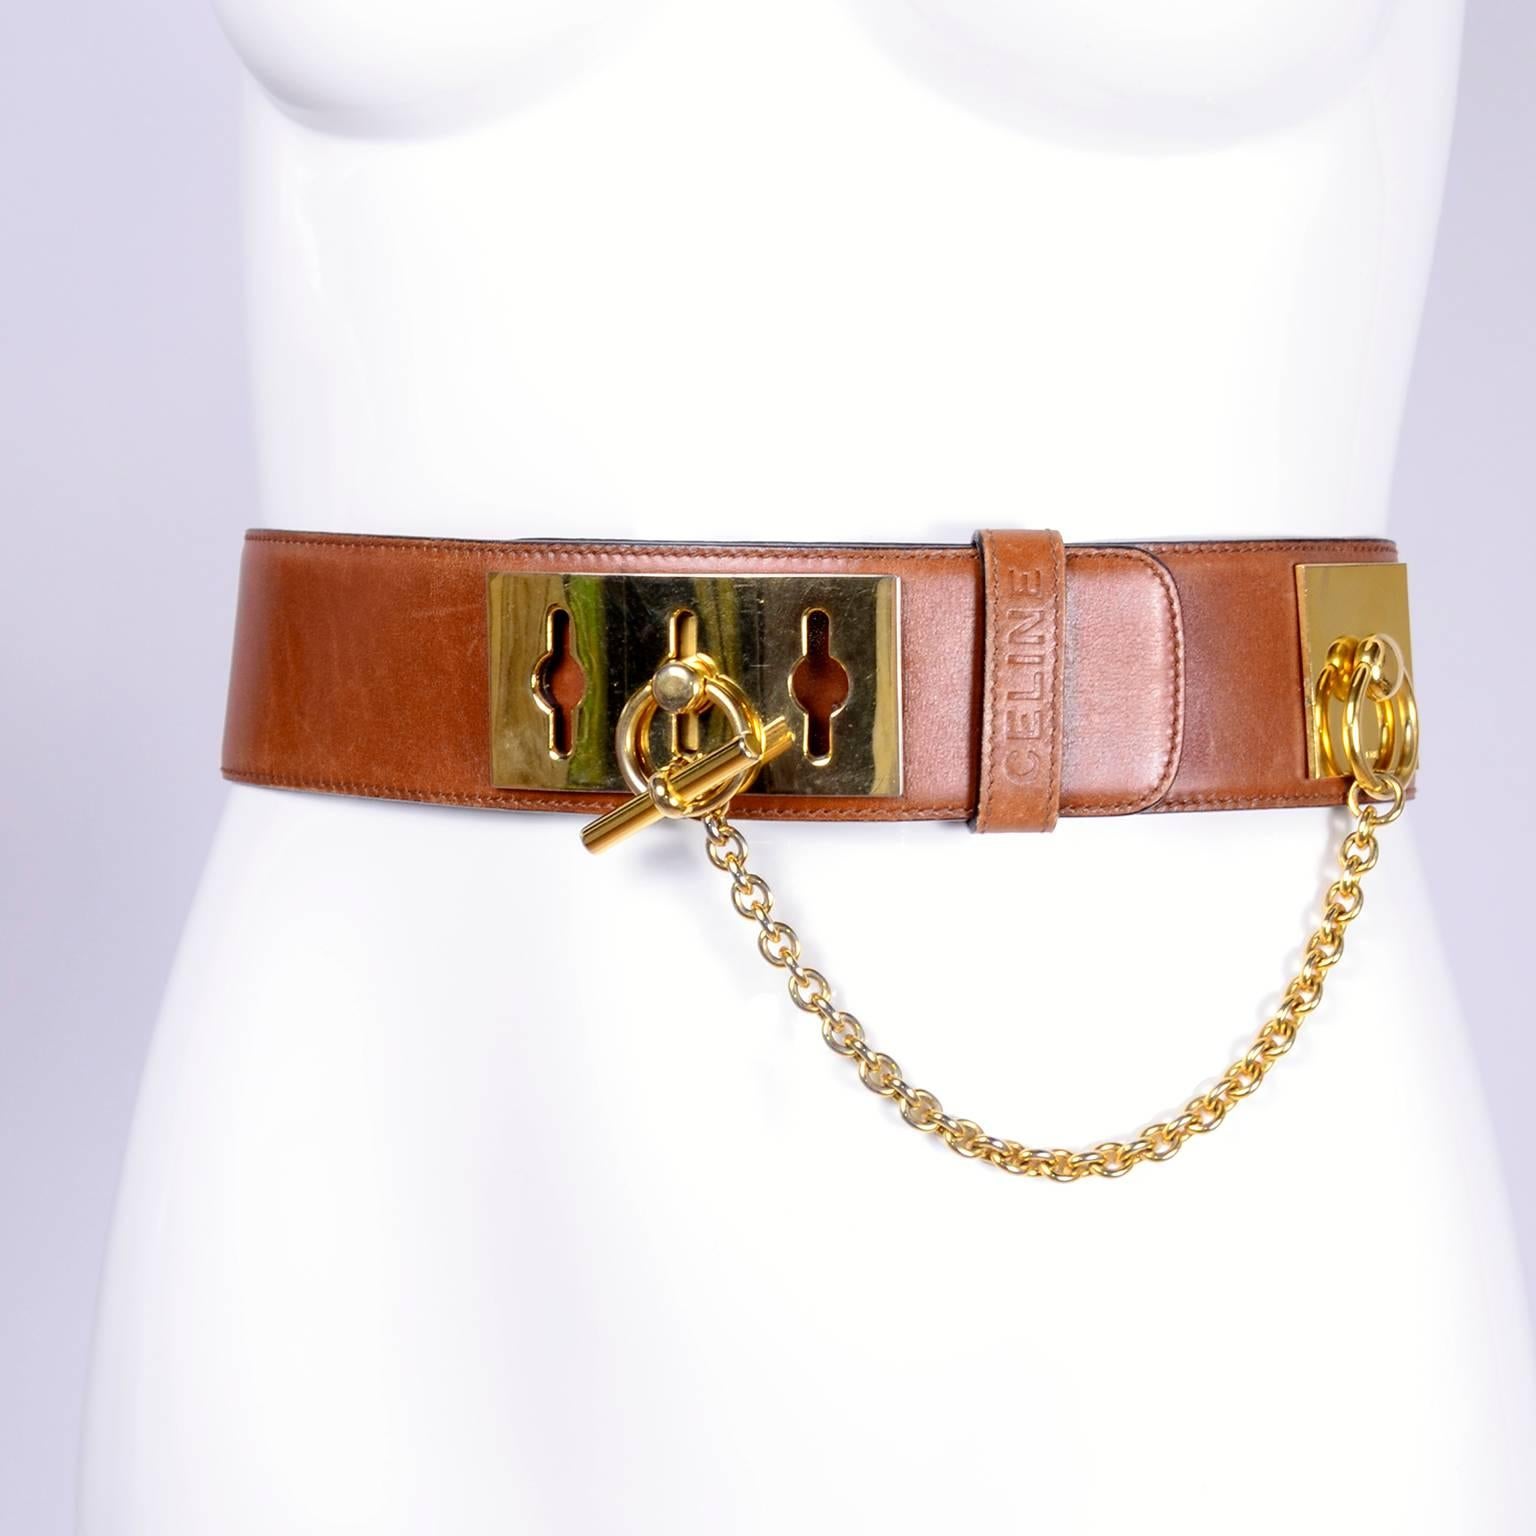 Women's Celine Belt in Caramel Brown Leather With Gold Chain & Metal Peg Toggle Closure